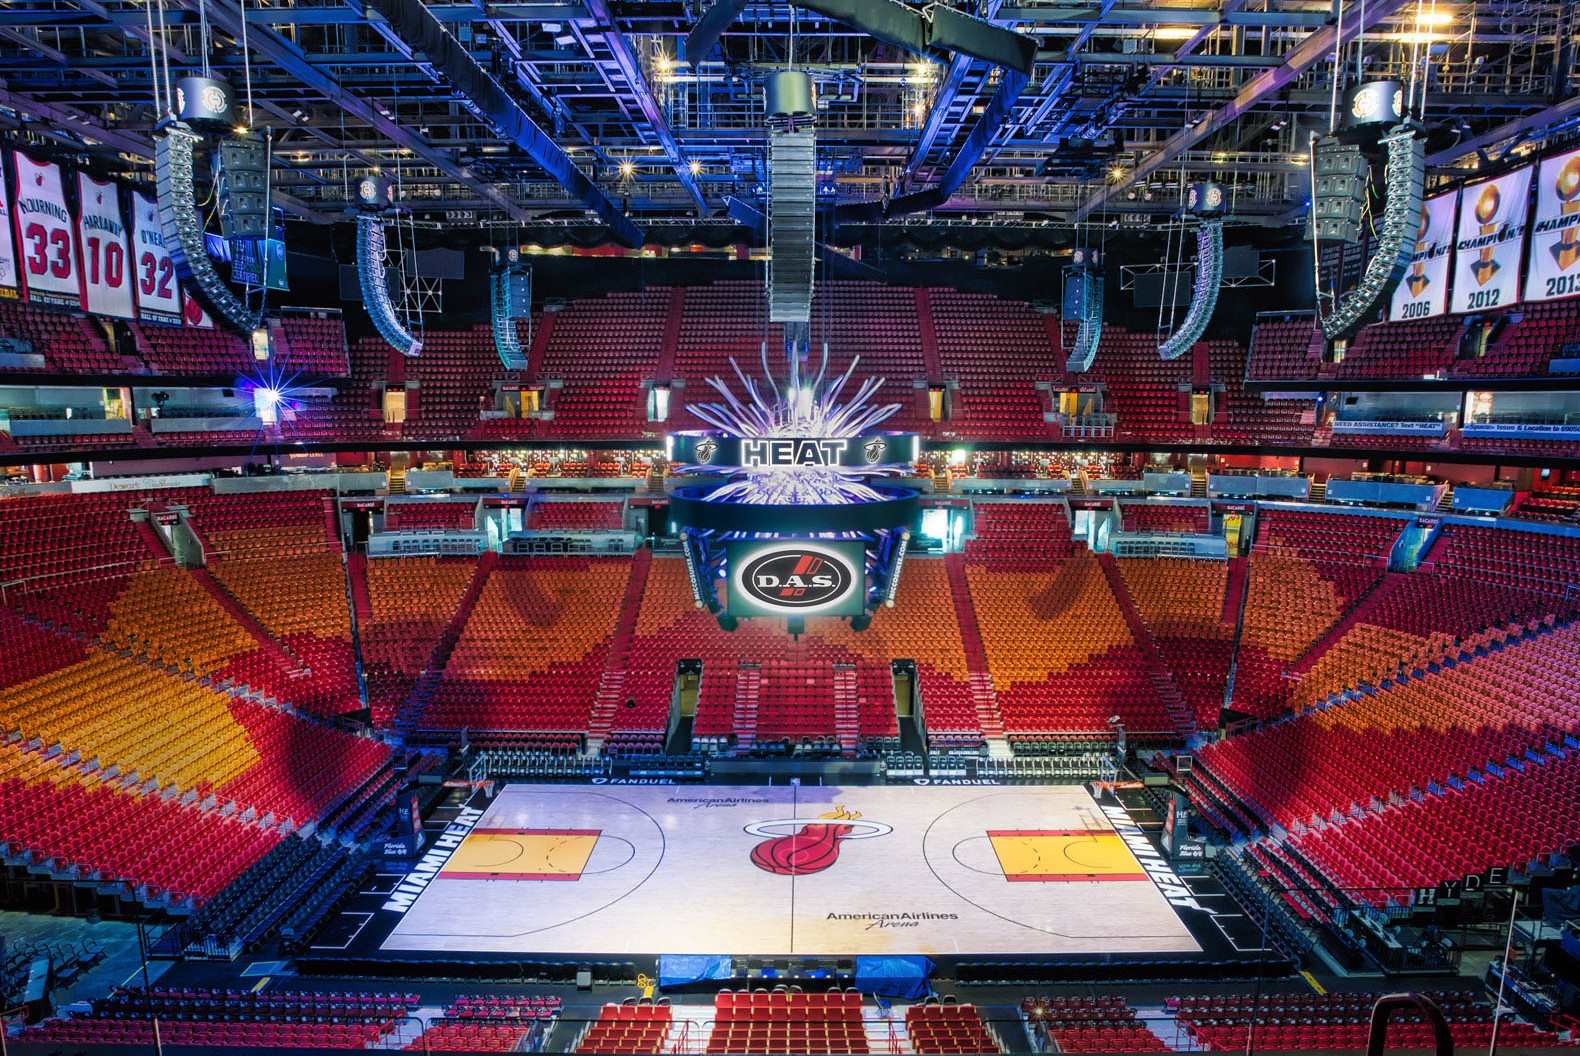 9-surprising-facts-about-american-airlines-arena